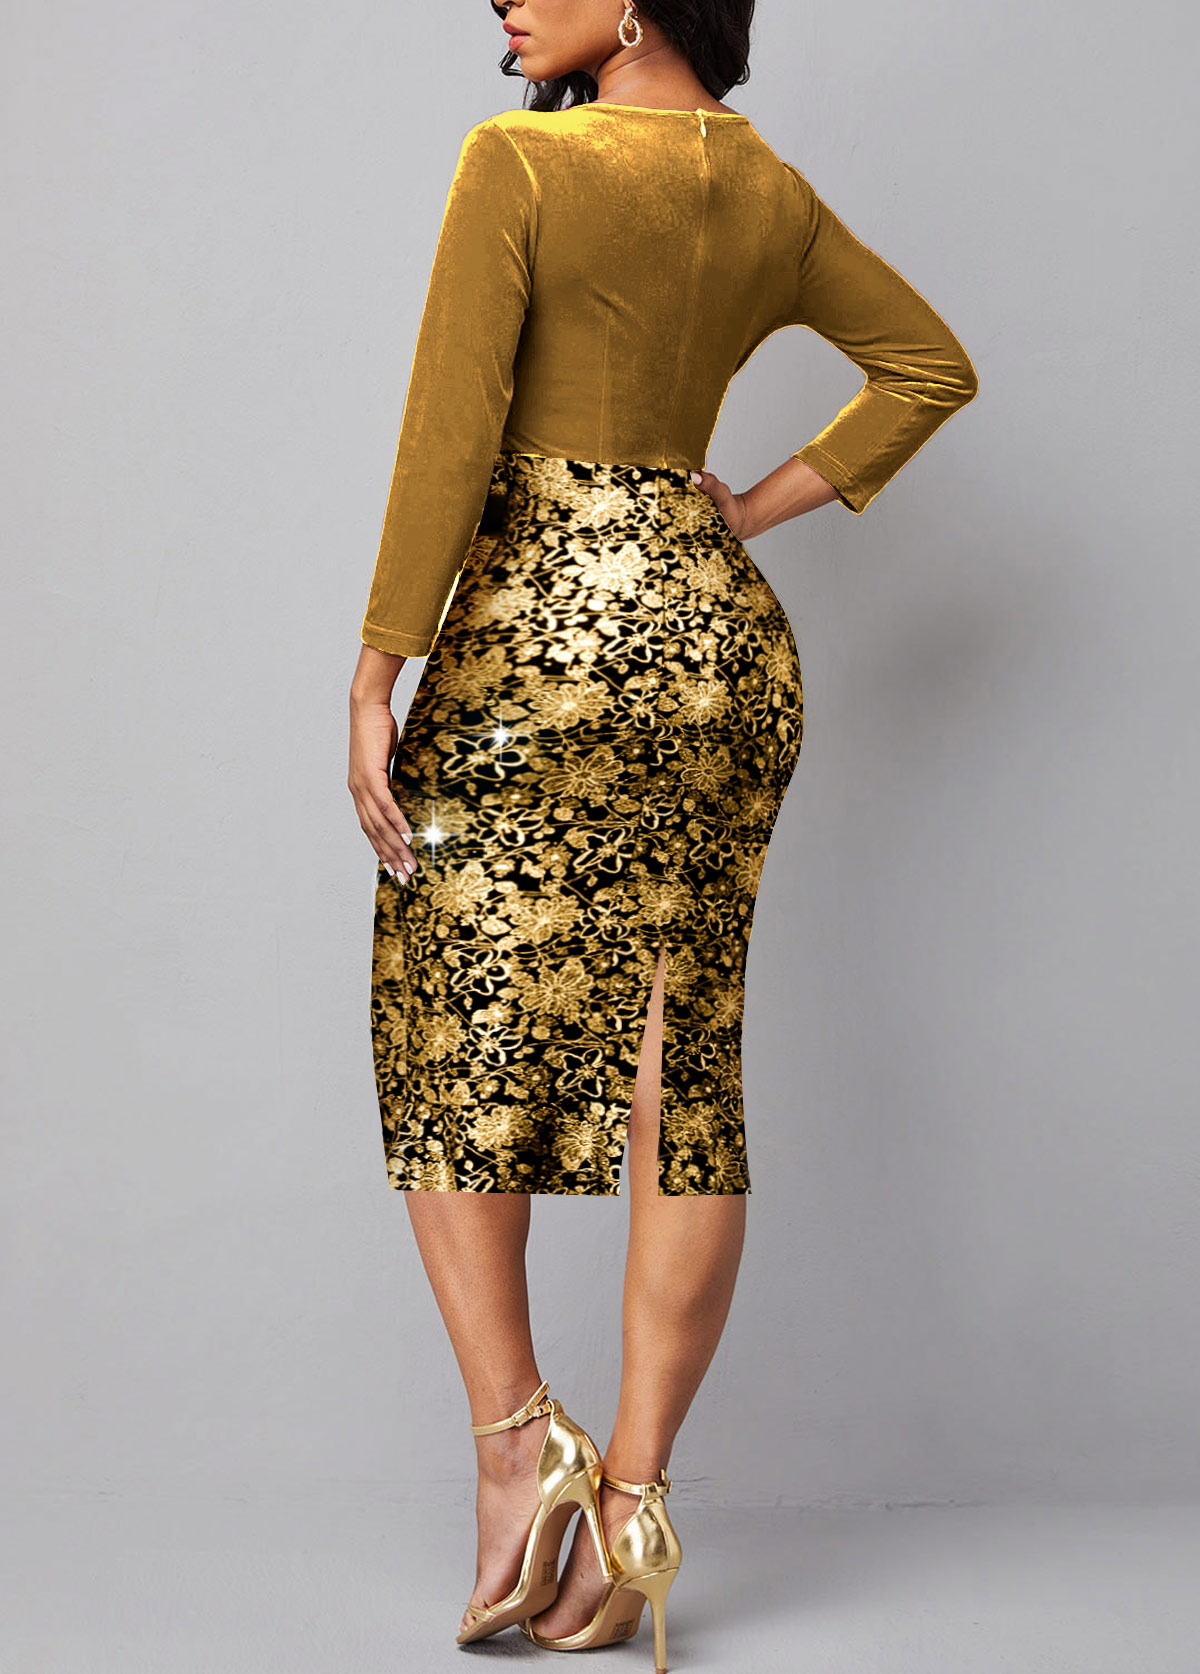 New Year Floral Print Hot Stamping Belted Golden Dress